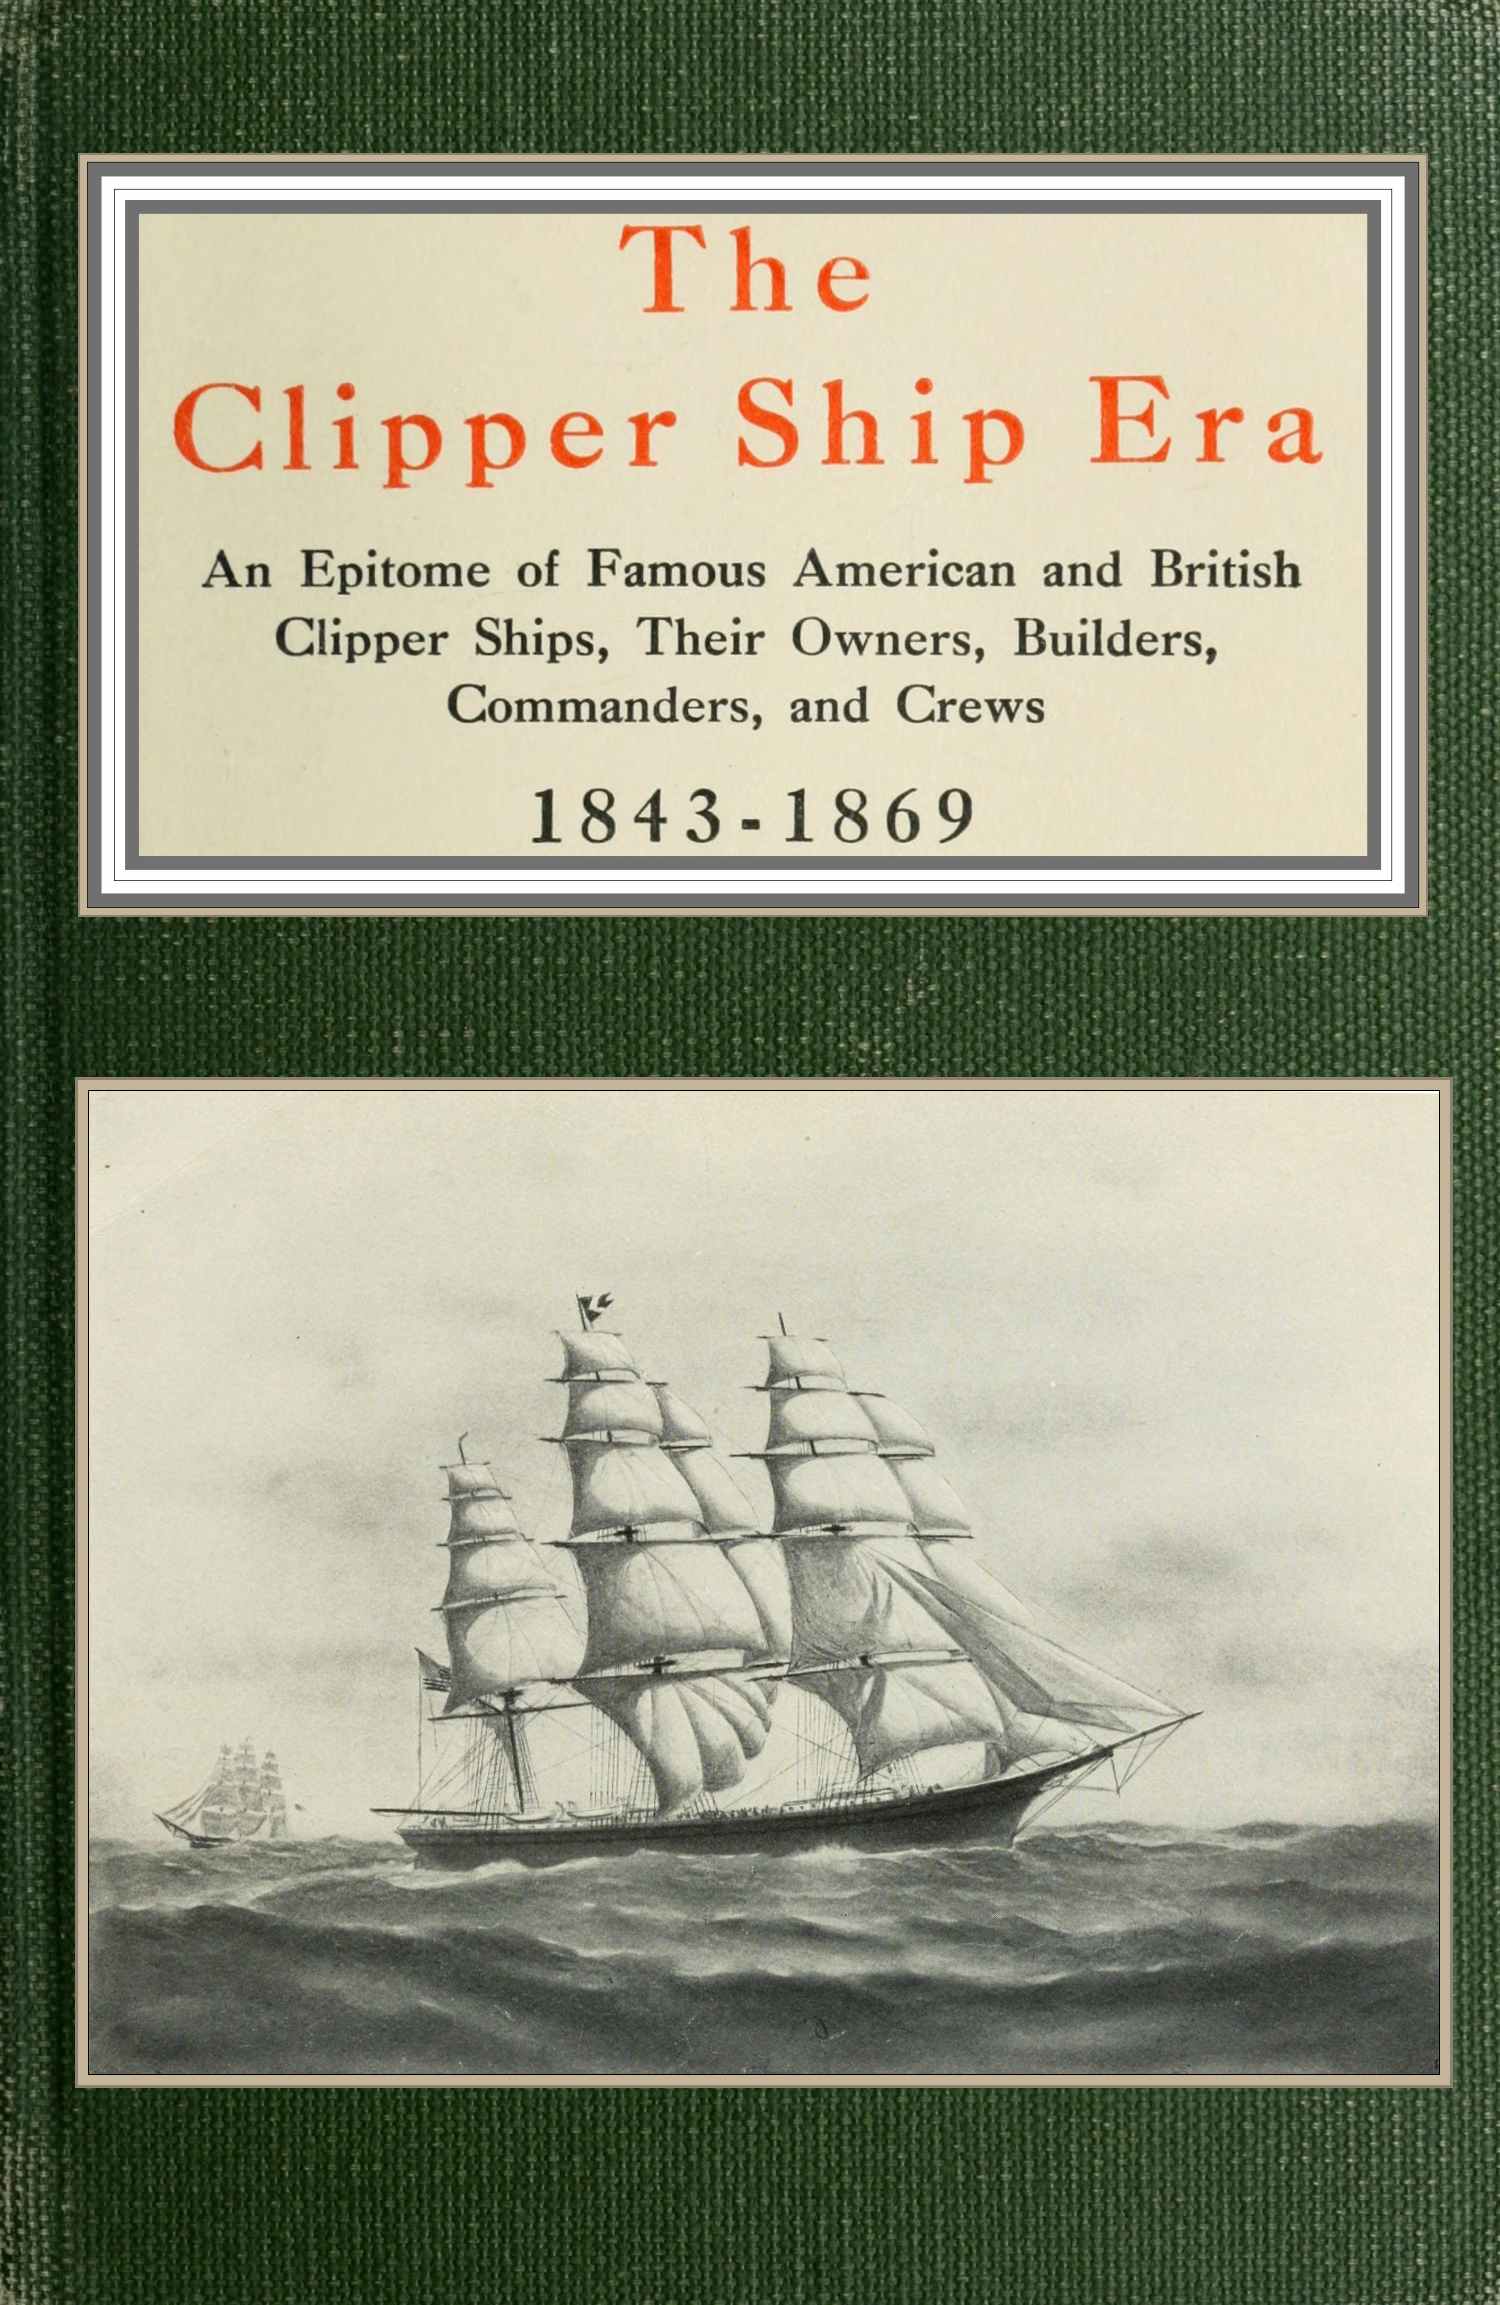 A History of the Ship's Compass  Naval History Magazine - December 2022,  Volume 36, Number 6